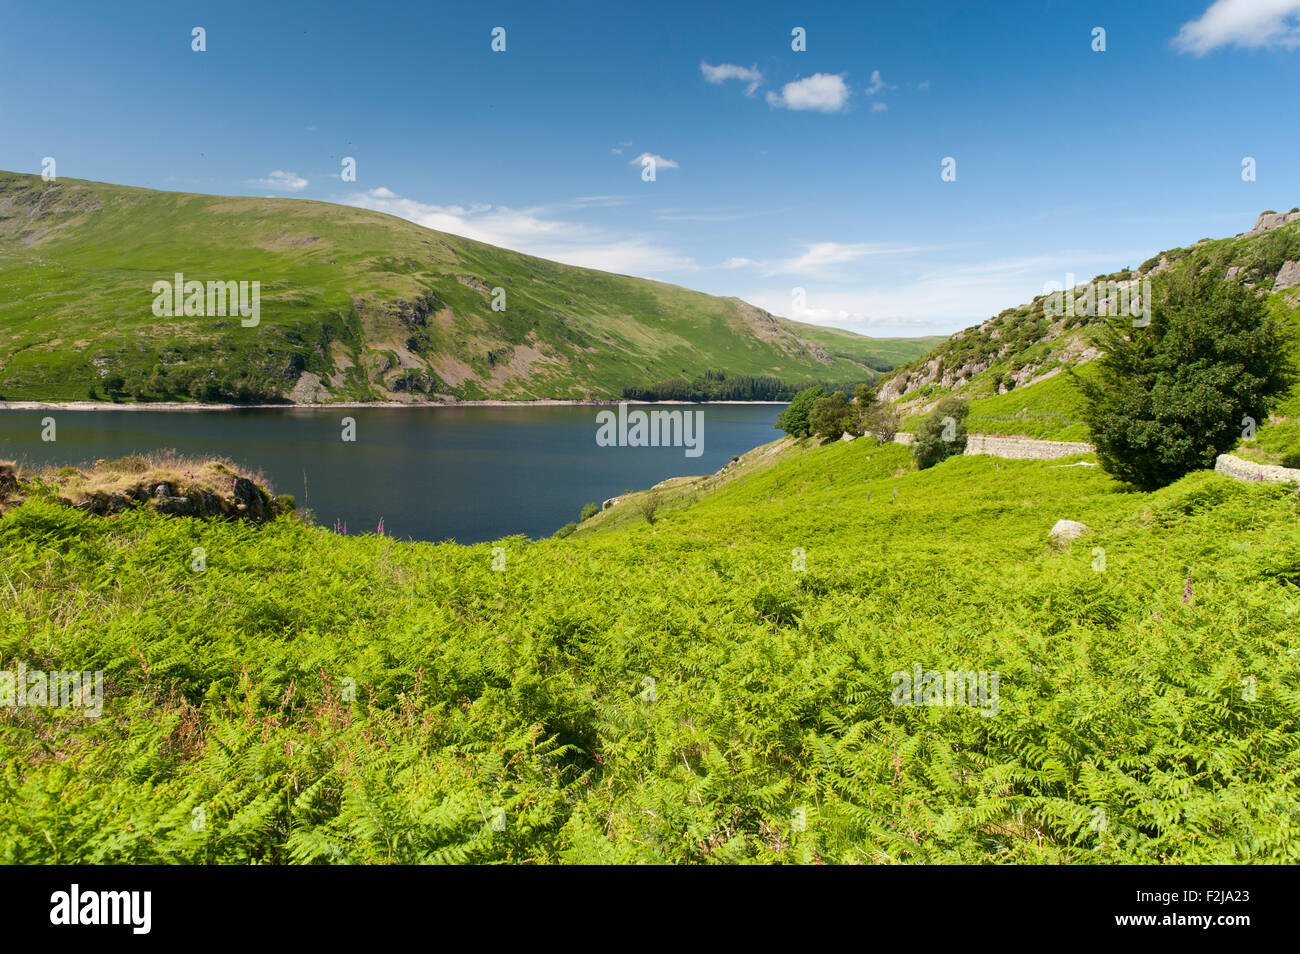 Haweswater reservoir in the English Lake District. Cumbria, UK, early summer. Stock Photo